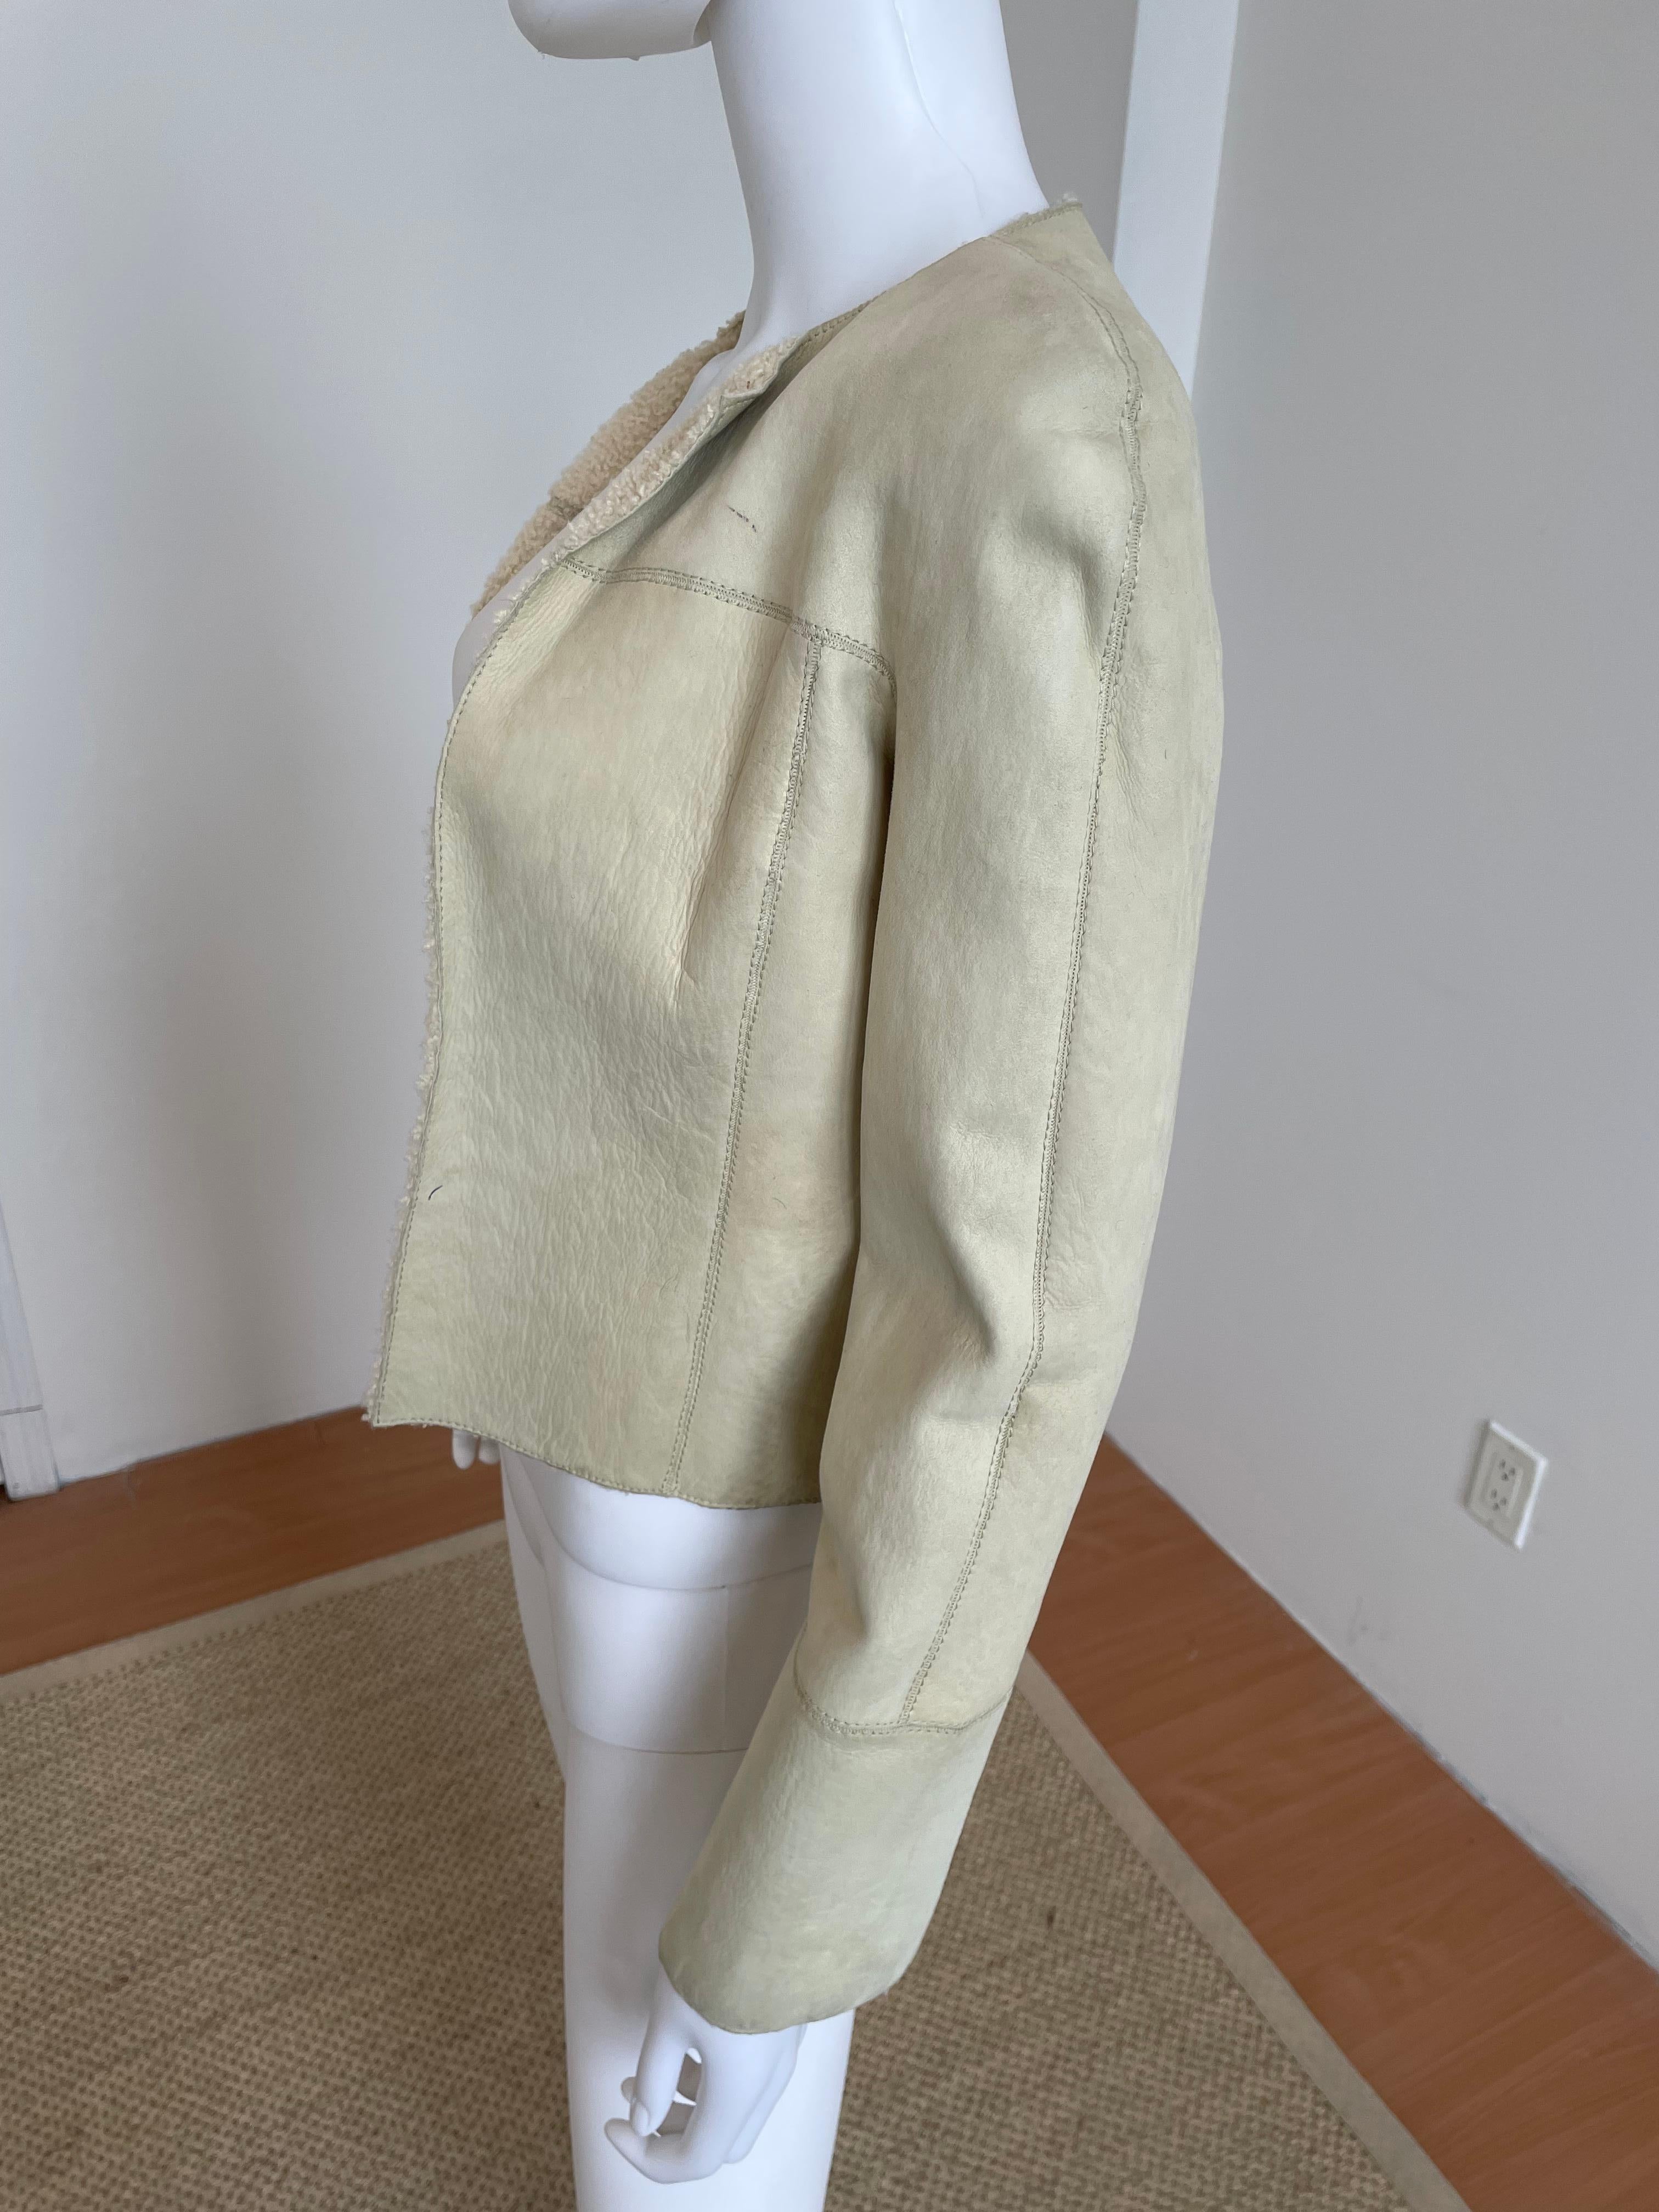 Valentino Ivory Suede and Shearling Cropped Jacket
Size 4. Never worn and tags still attached
Made In Italy
100% Lamb
Meant to be worn open, as there are no front closures
Slight pen marks as seen in pictures